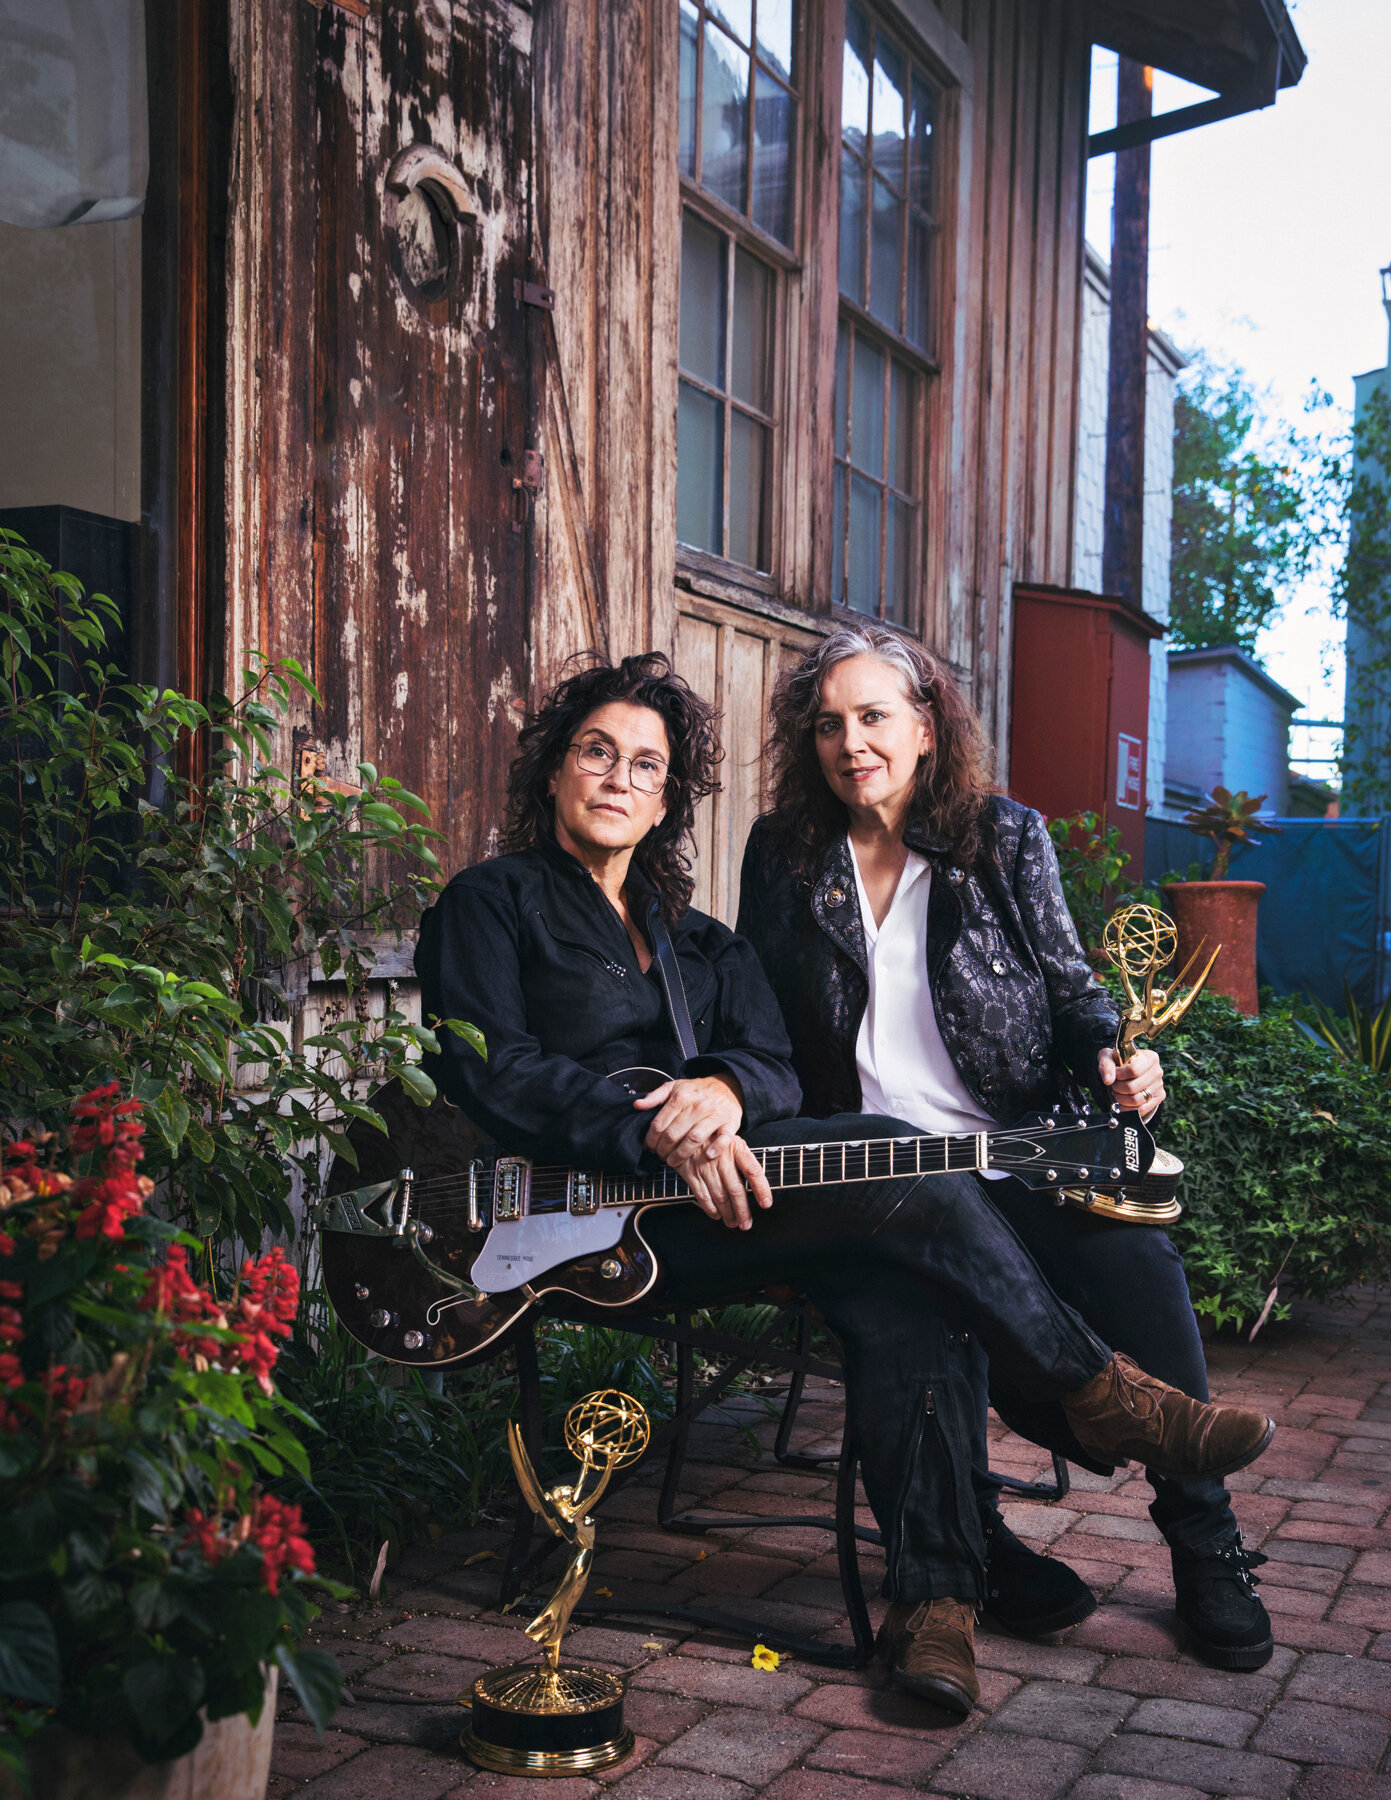 Wendy Melvoin & Lisa Coleman. Photographed outside their studio on the Jim Henson Company Lot.